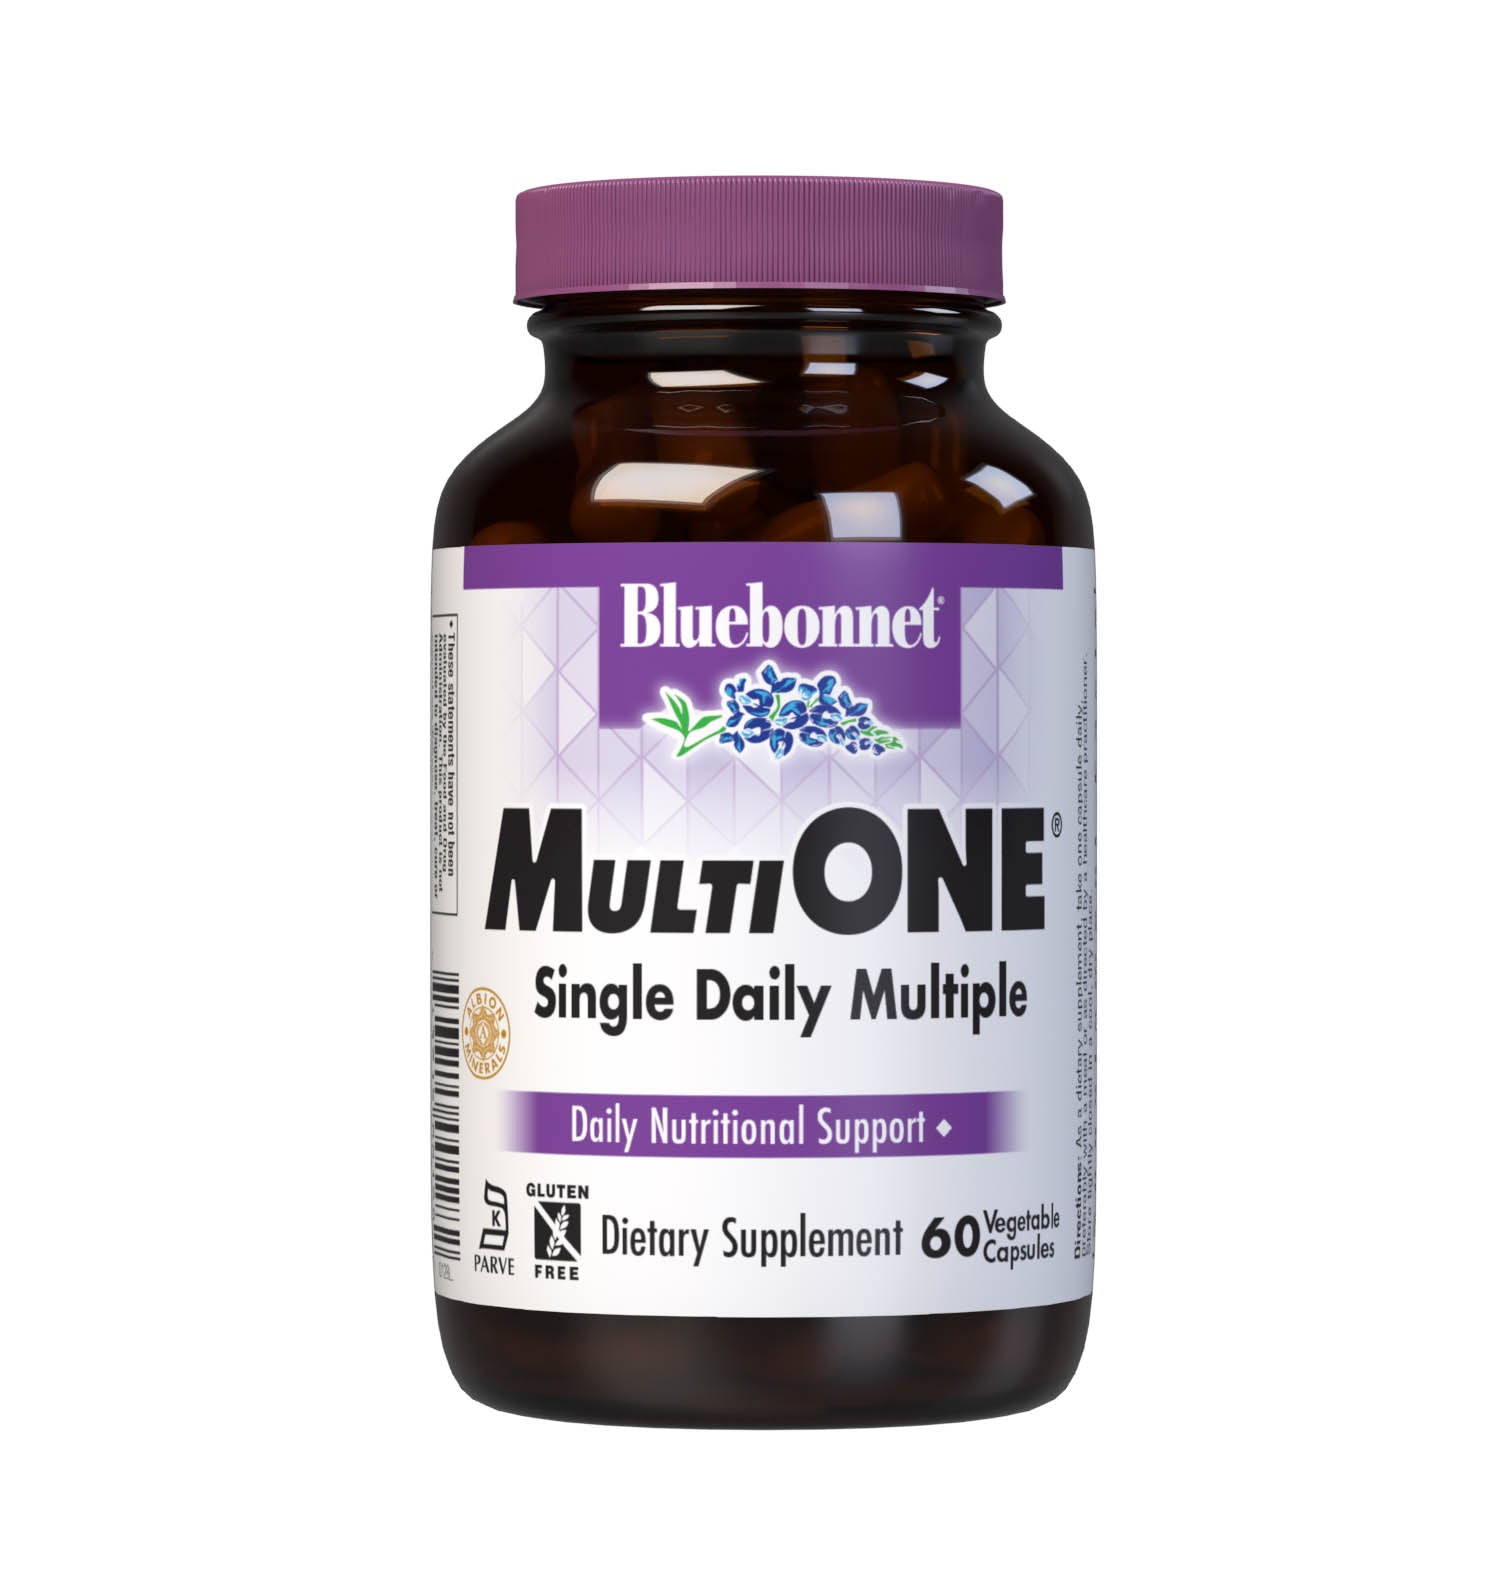 Bluebonnet’s Multi One Formula 60 Vegetable Capsules is a single daily multivitamin and multimineral dietary supplement in an easy-to-swallow, two-piece vegetable capsule and is formulated with highly efficient, patented Albion chelated minerals and popular carotenoids, such as beta carotene and FloraGLO lutein from marigold extract. #size_60 count